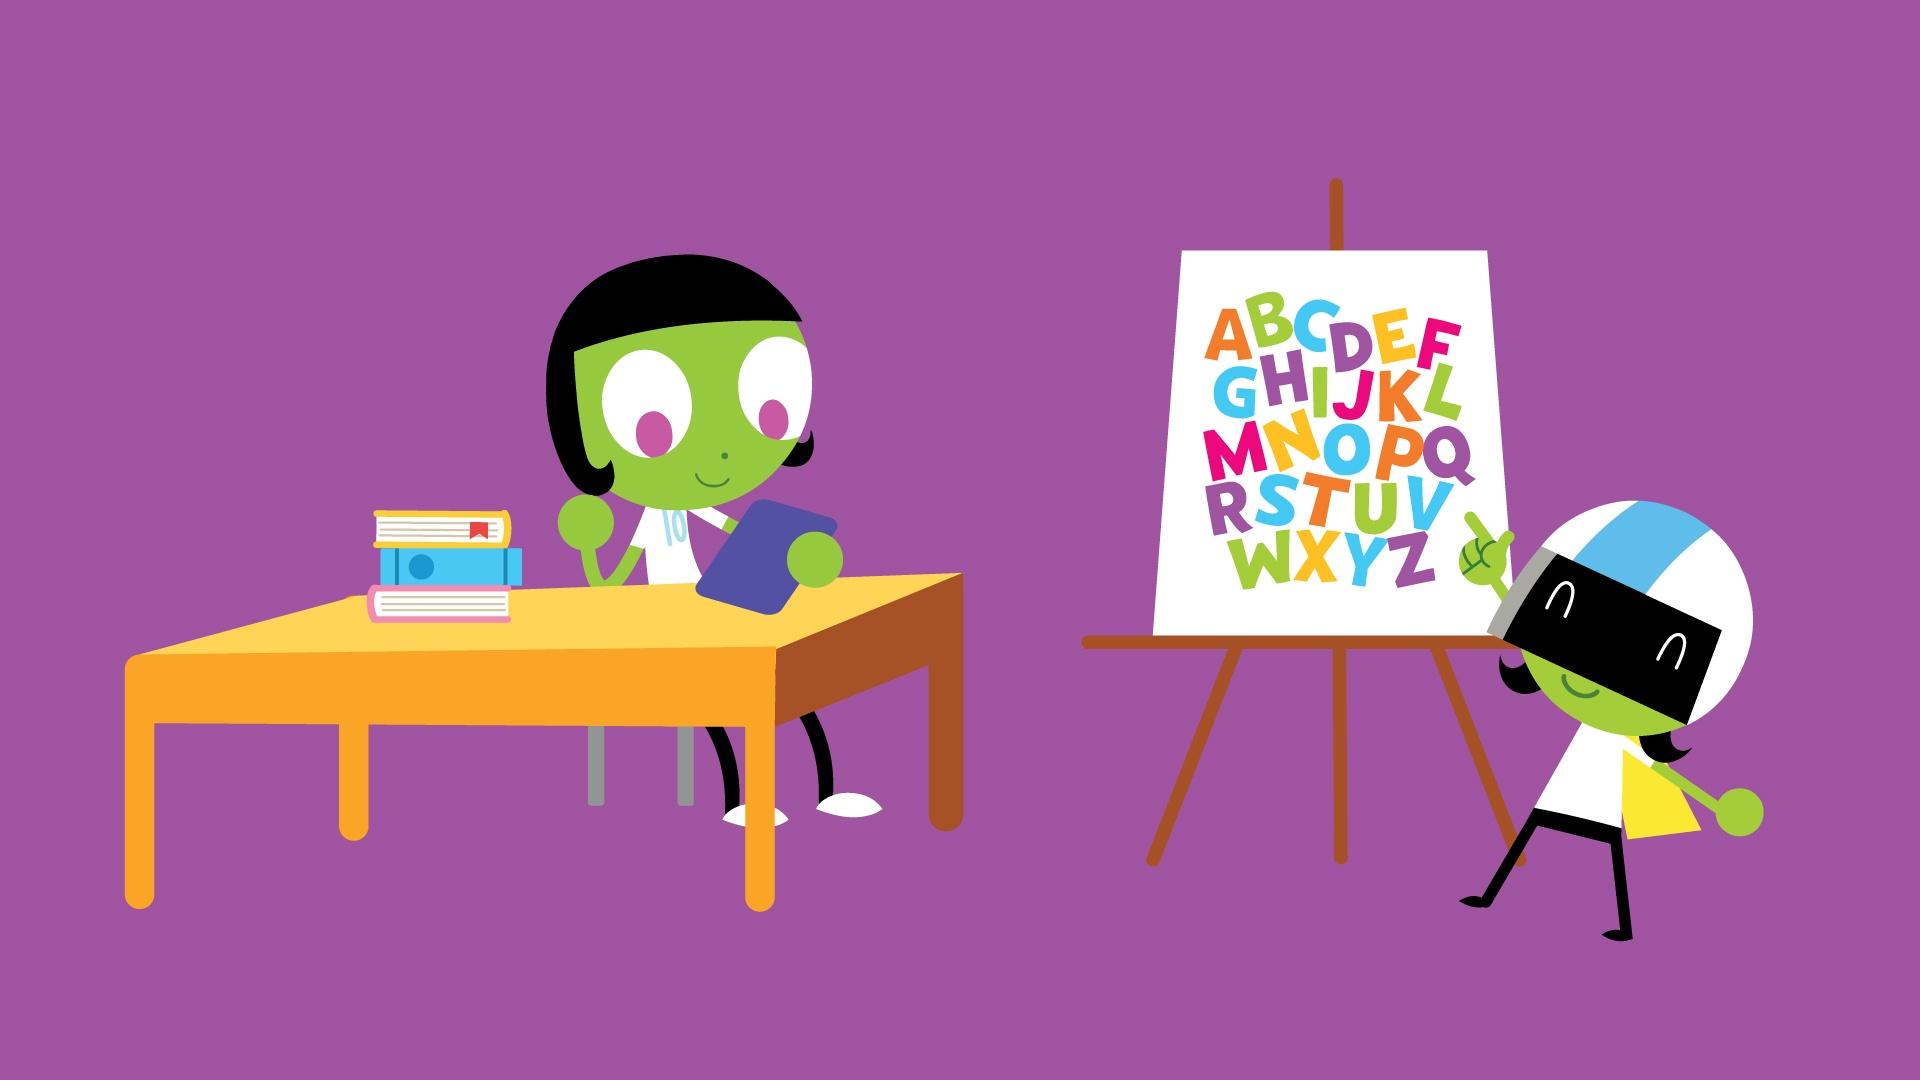 PBS Kids Young Learners mez image featuring characters Dot and Dee with a letter board and a table with books on it.